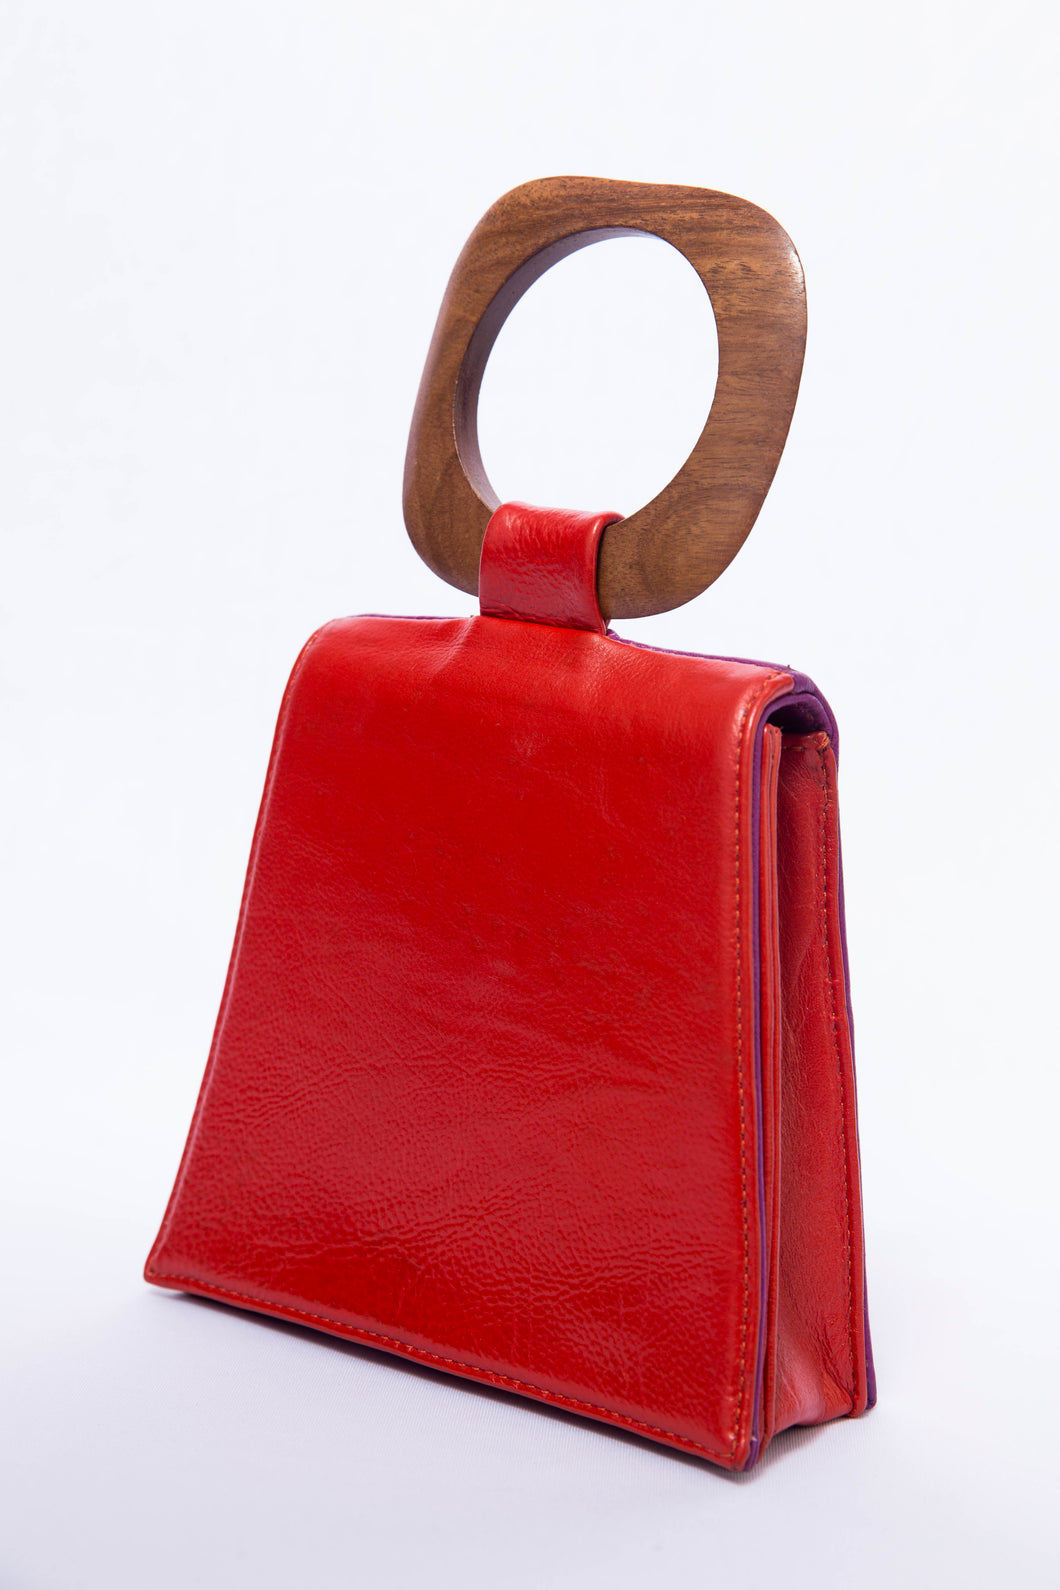 Red and Purple Clutch Bag